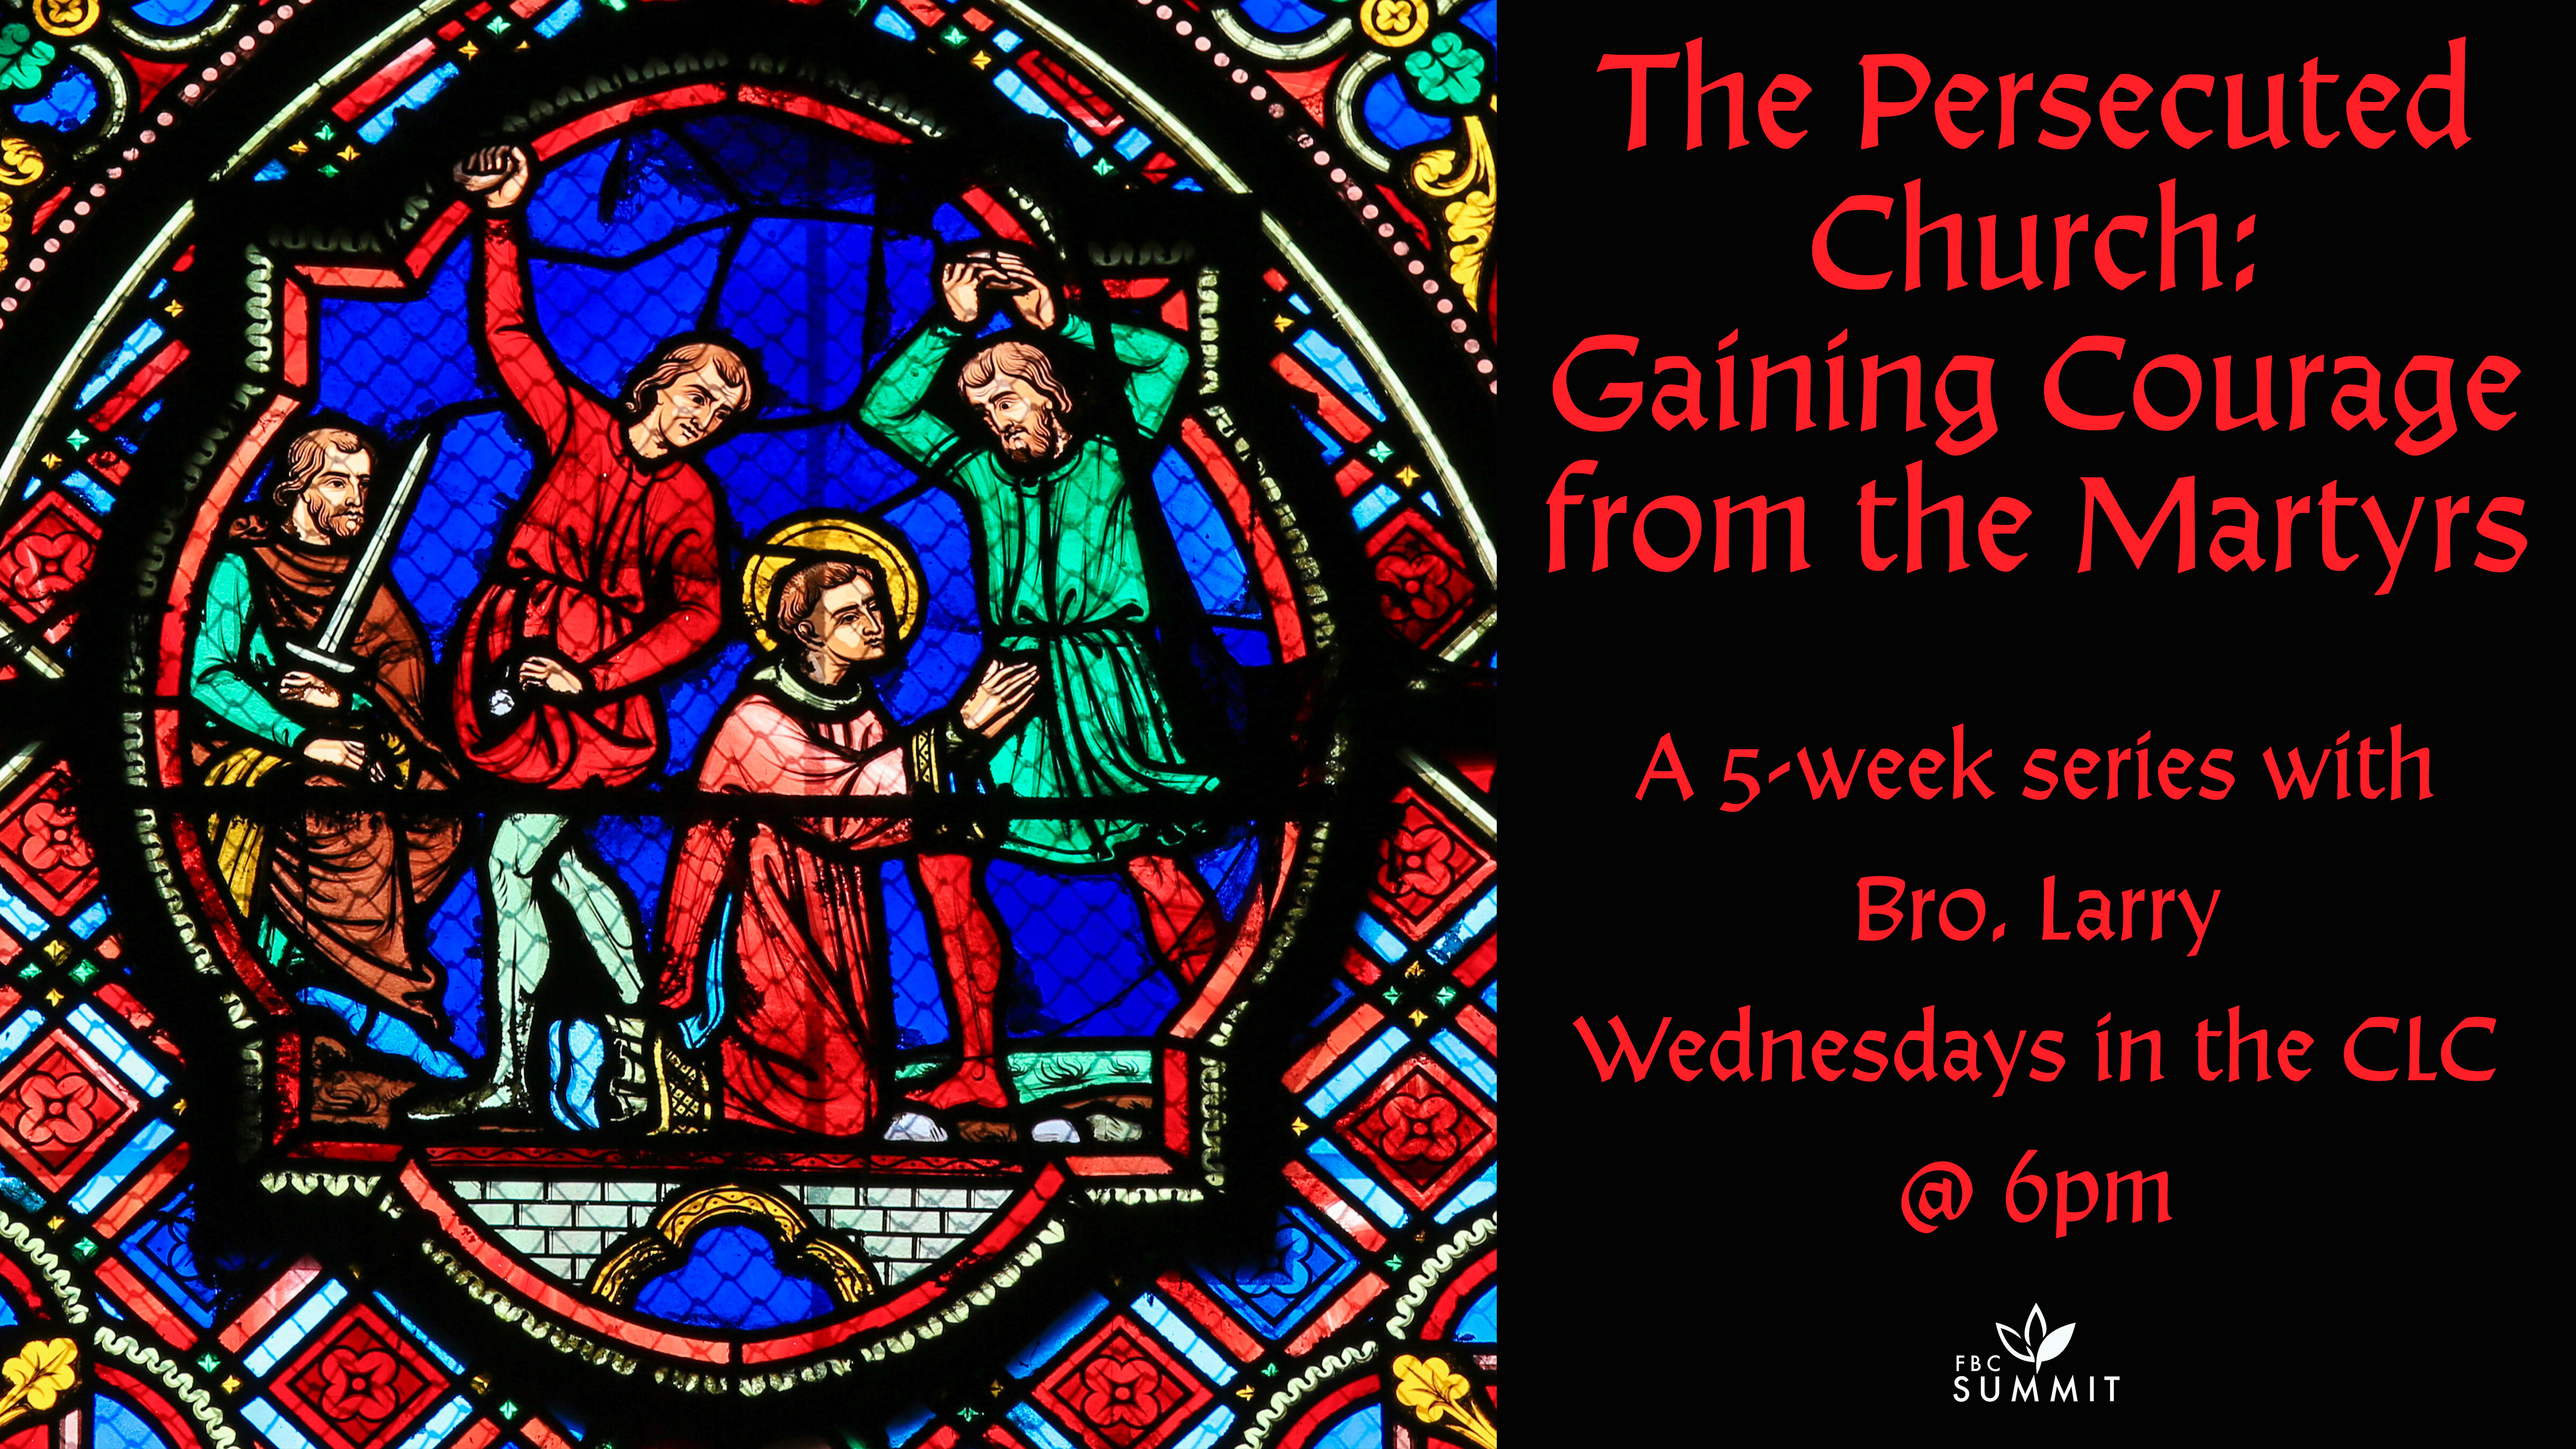 Wednesday Bible Study: "The Persecuted Church: Gathering Courage from the Martyrs, Part I" // Dr. Larry LeBlanc